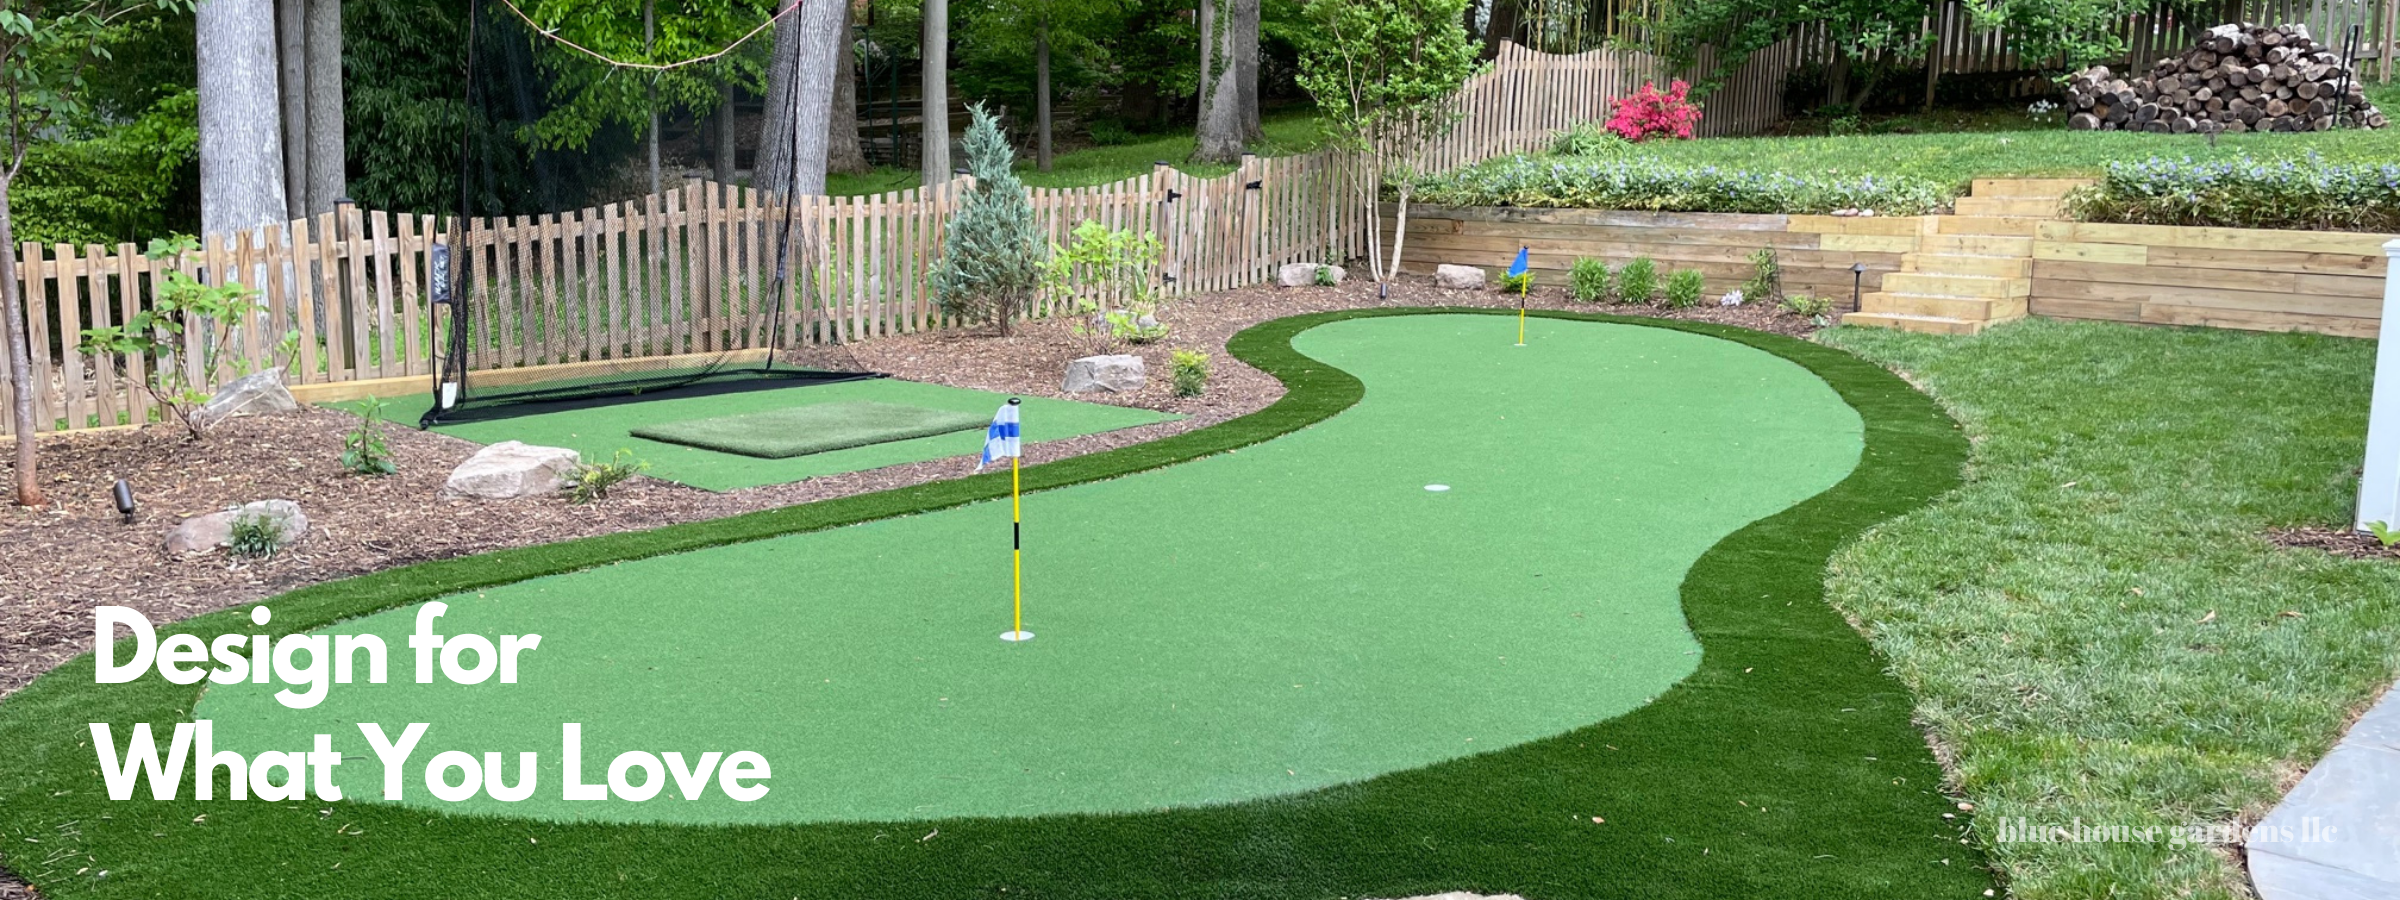 Photo of putting green